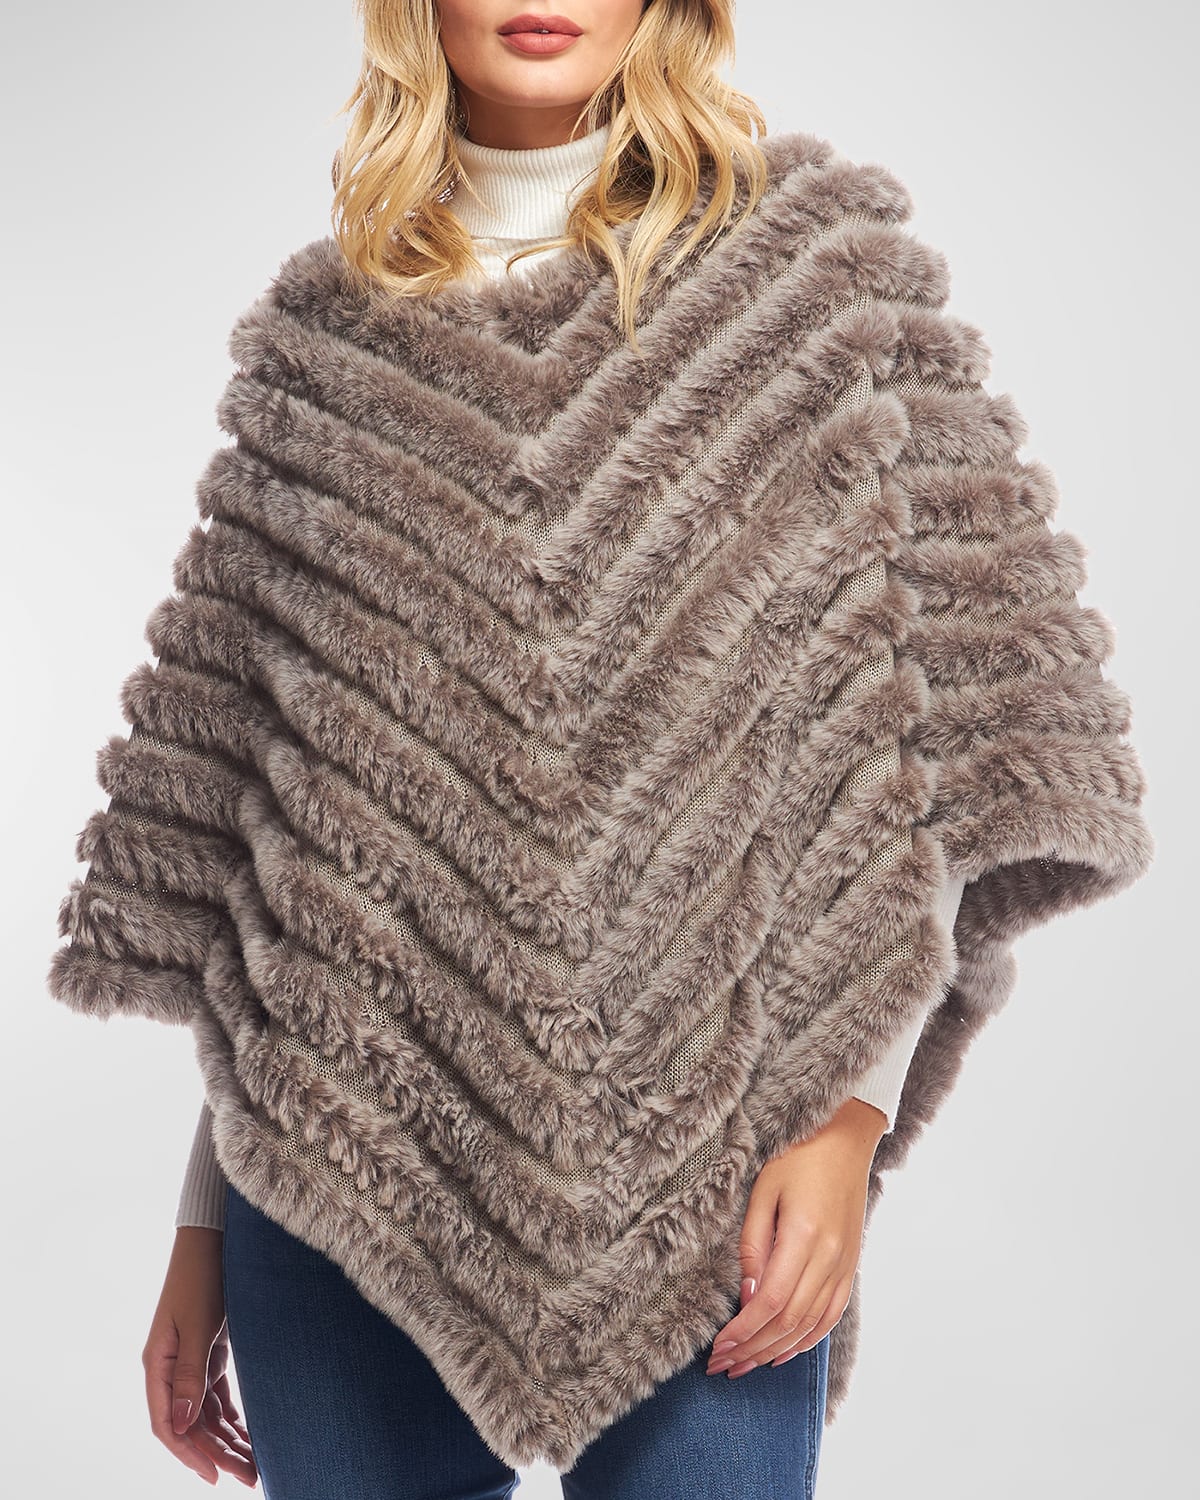 Fabulous Furs Deluxe Knitted Faux Fur Poncho In Natural